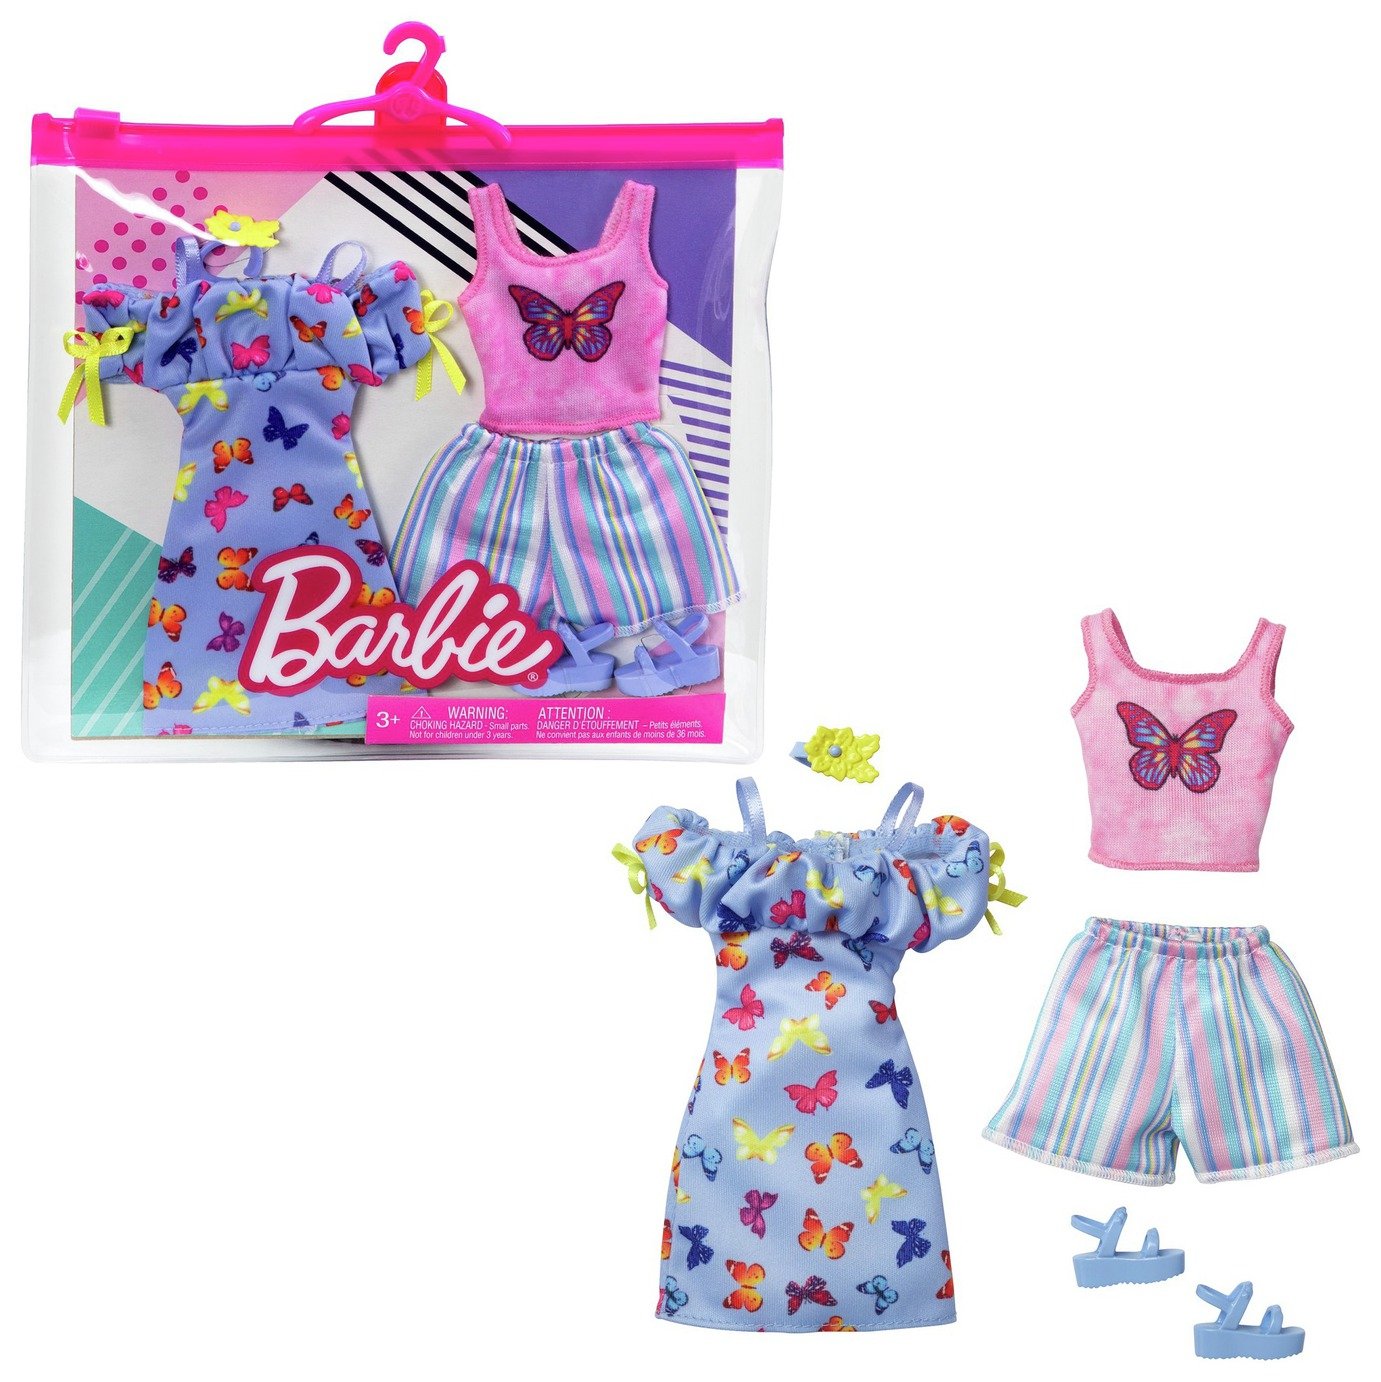 where can i buy barbie doll clothes